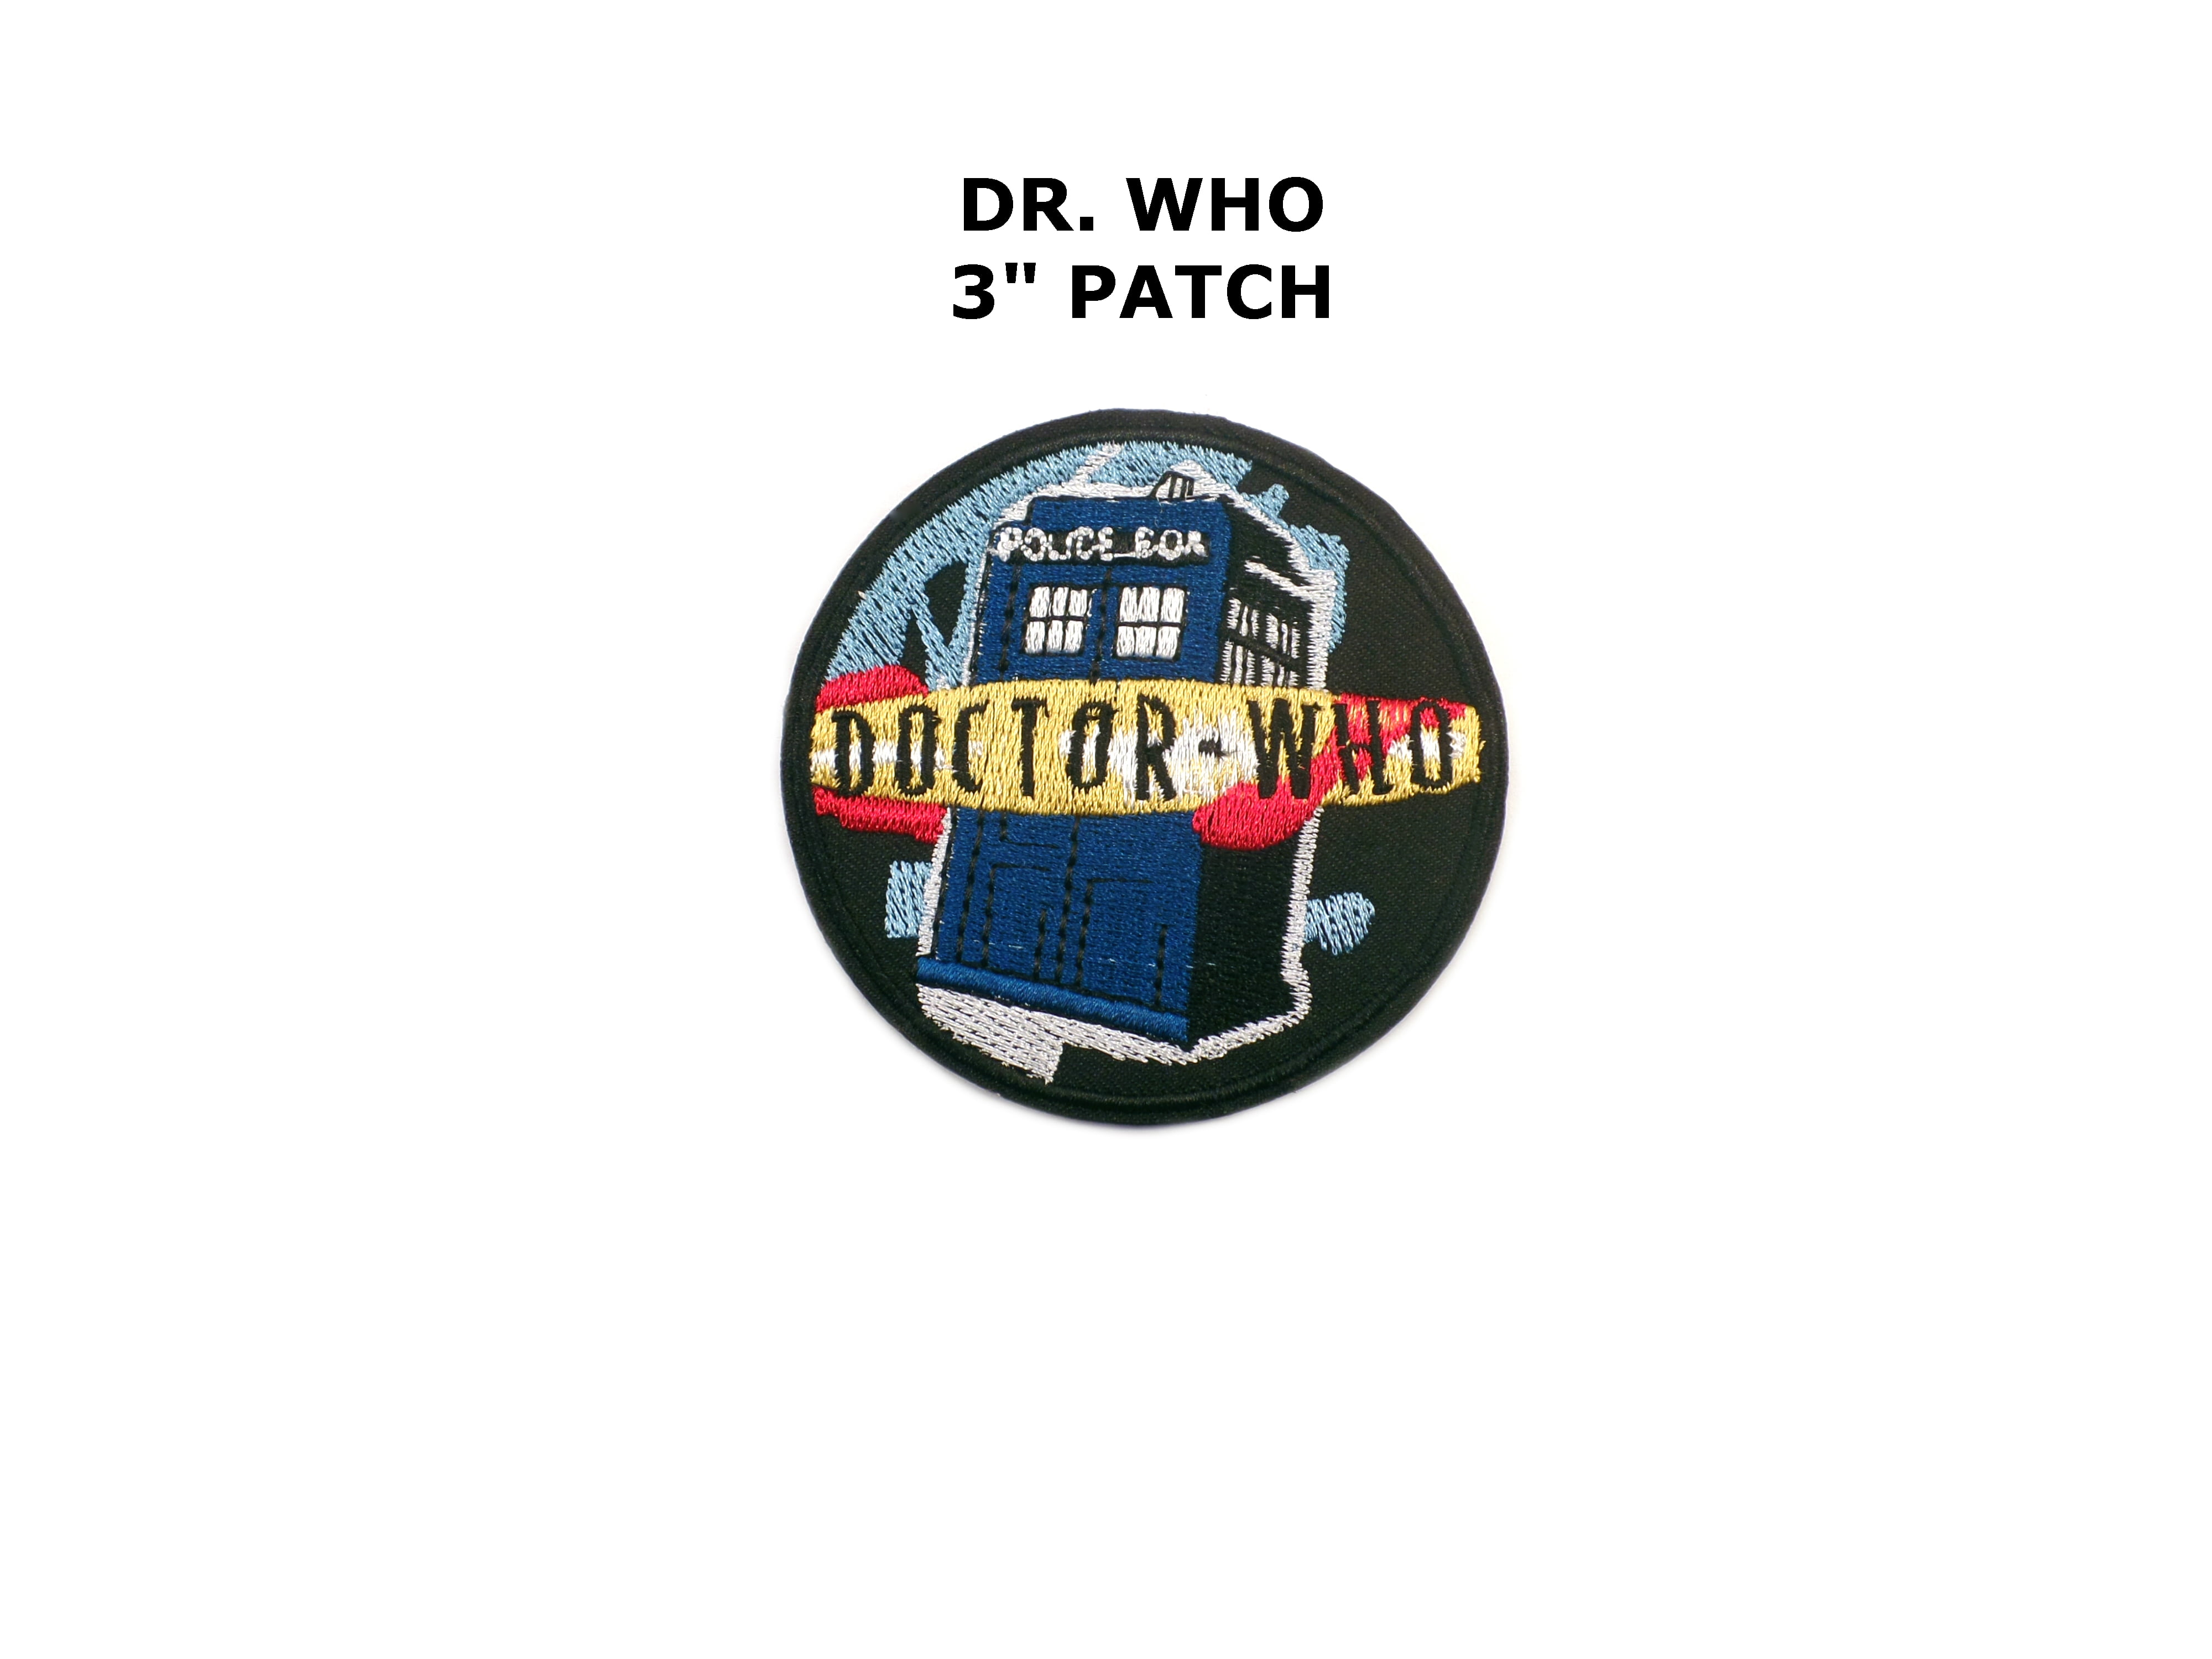 SCI FI TV SERIES EMBROIDERED IRON SEW ON BADGE PATCH 3" DOCTOR WHO THE DR 